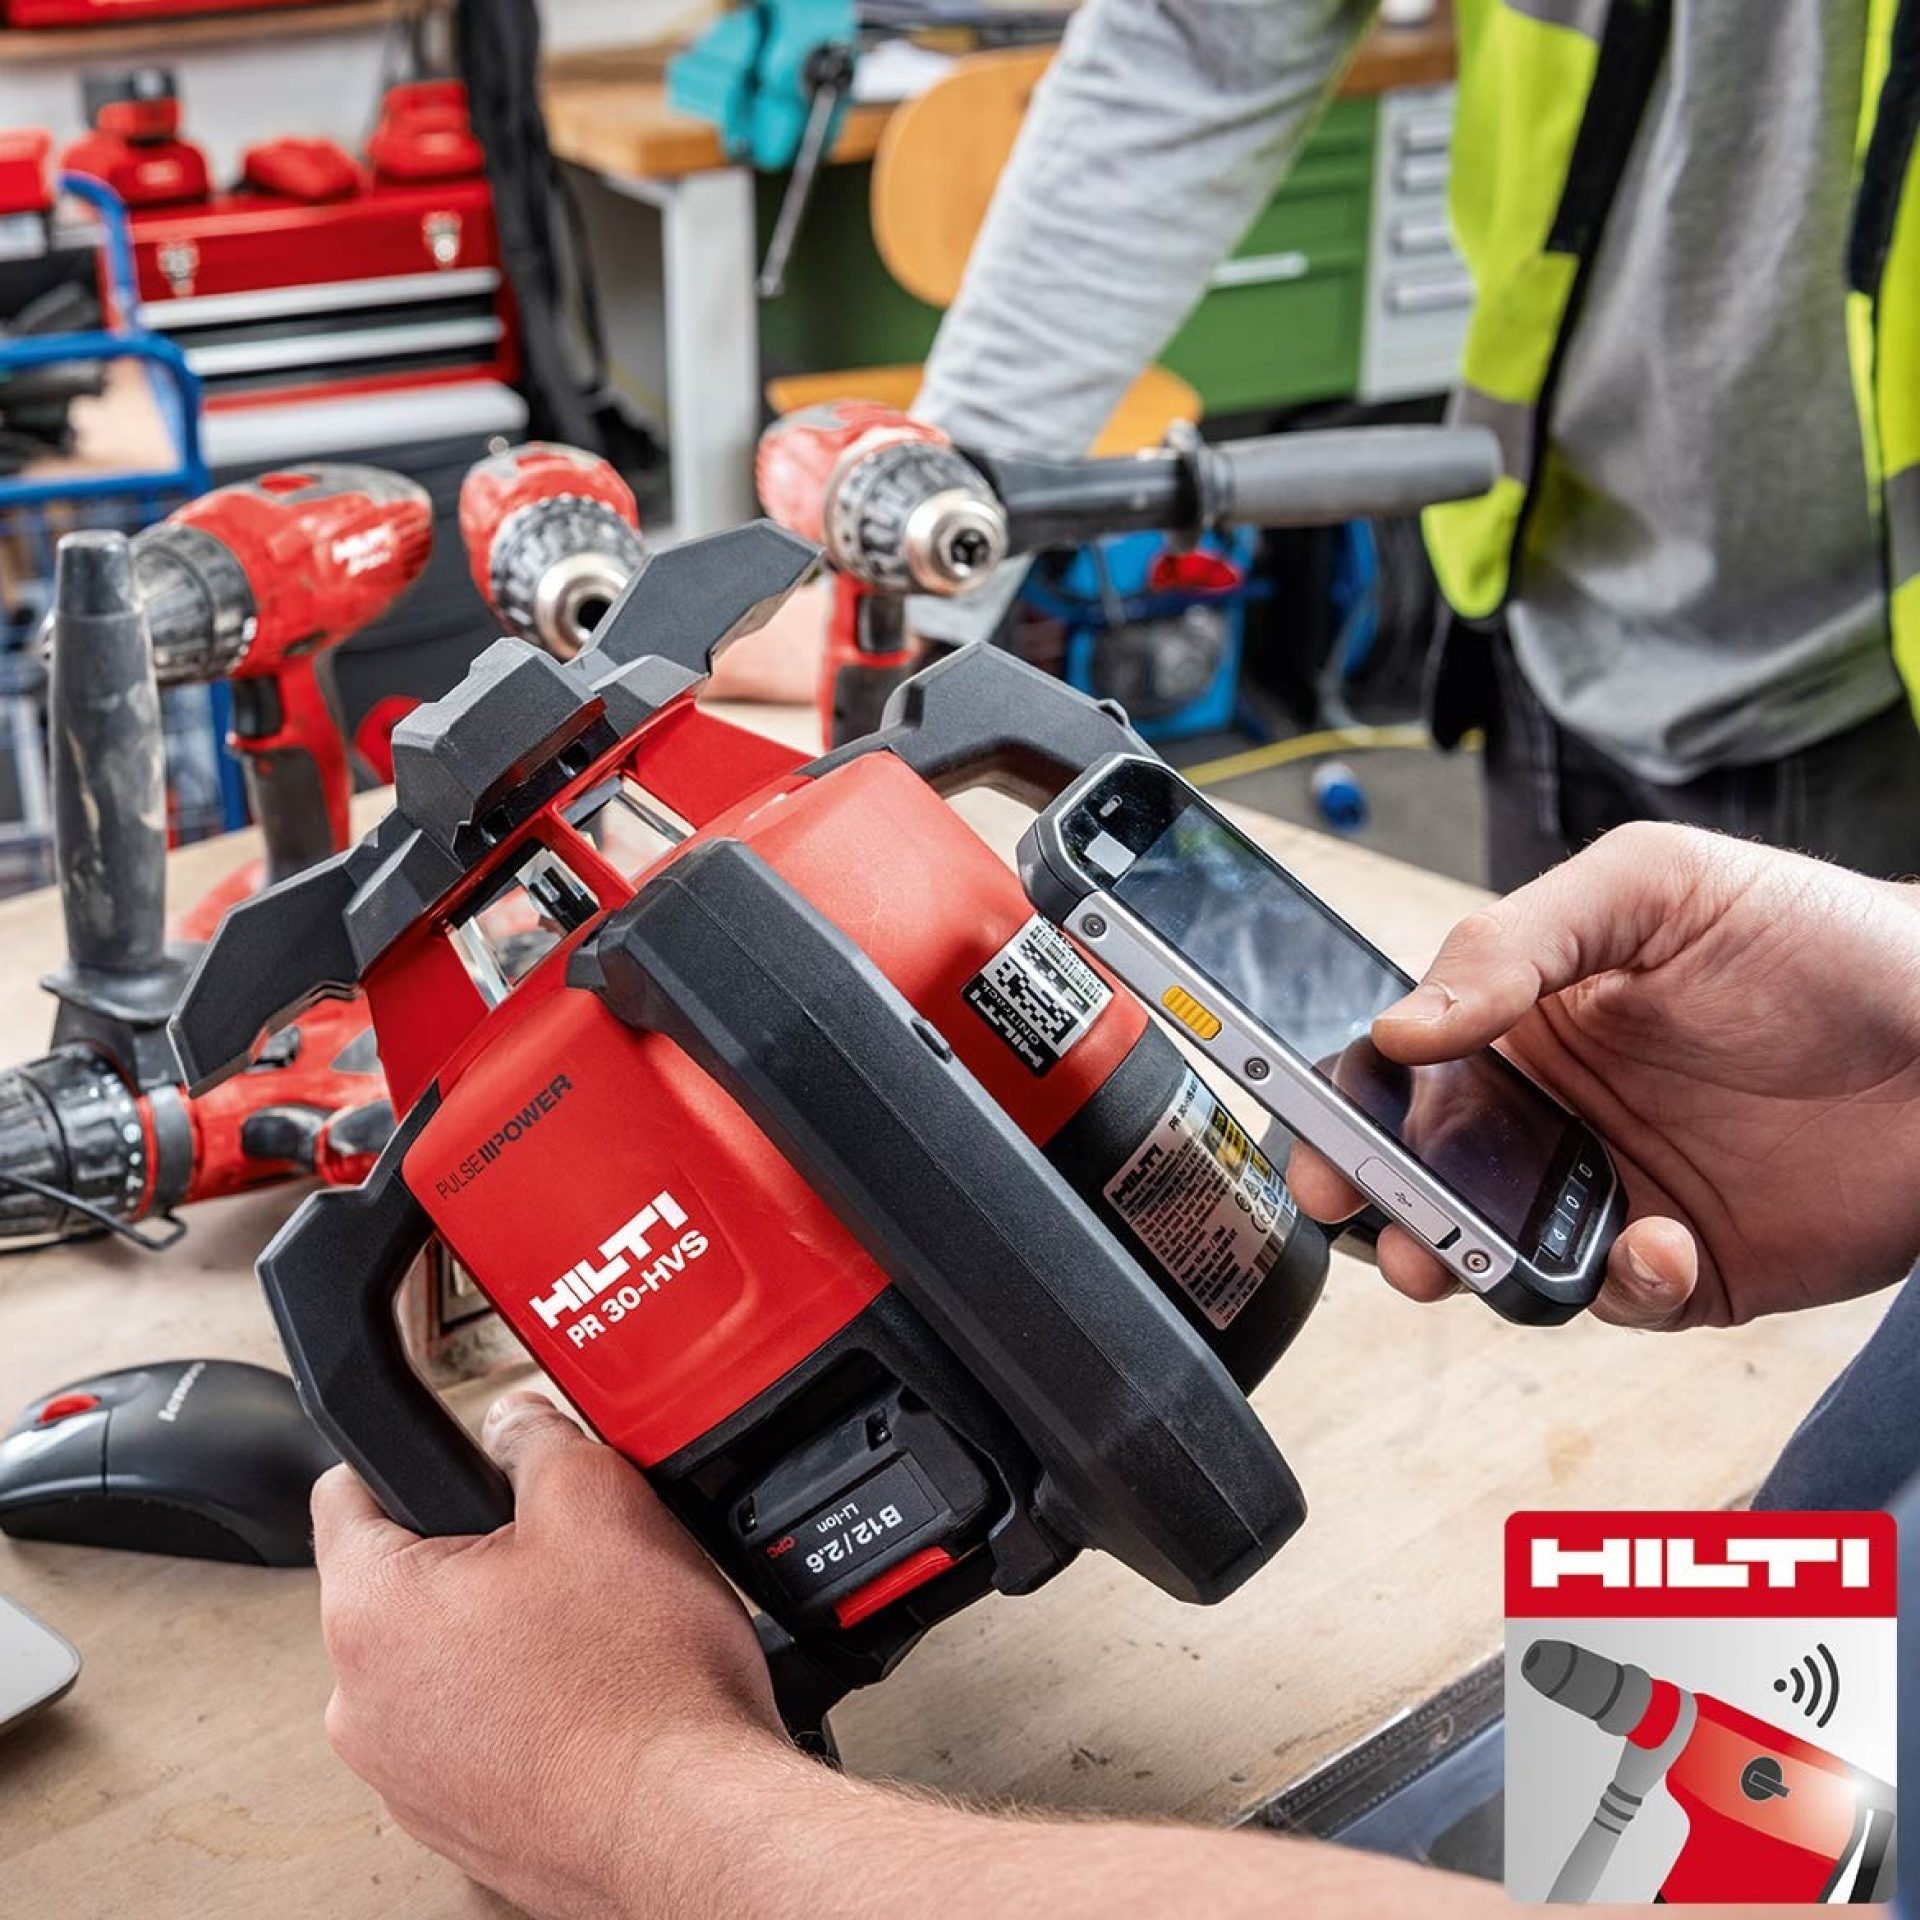 Hilti Connect App brings hassle-free tool services to your fingertips. Download from the App Store and Google Play